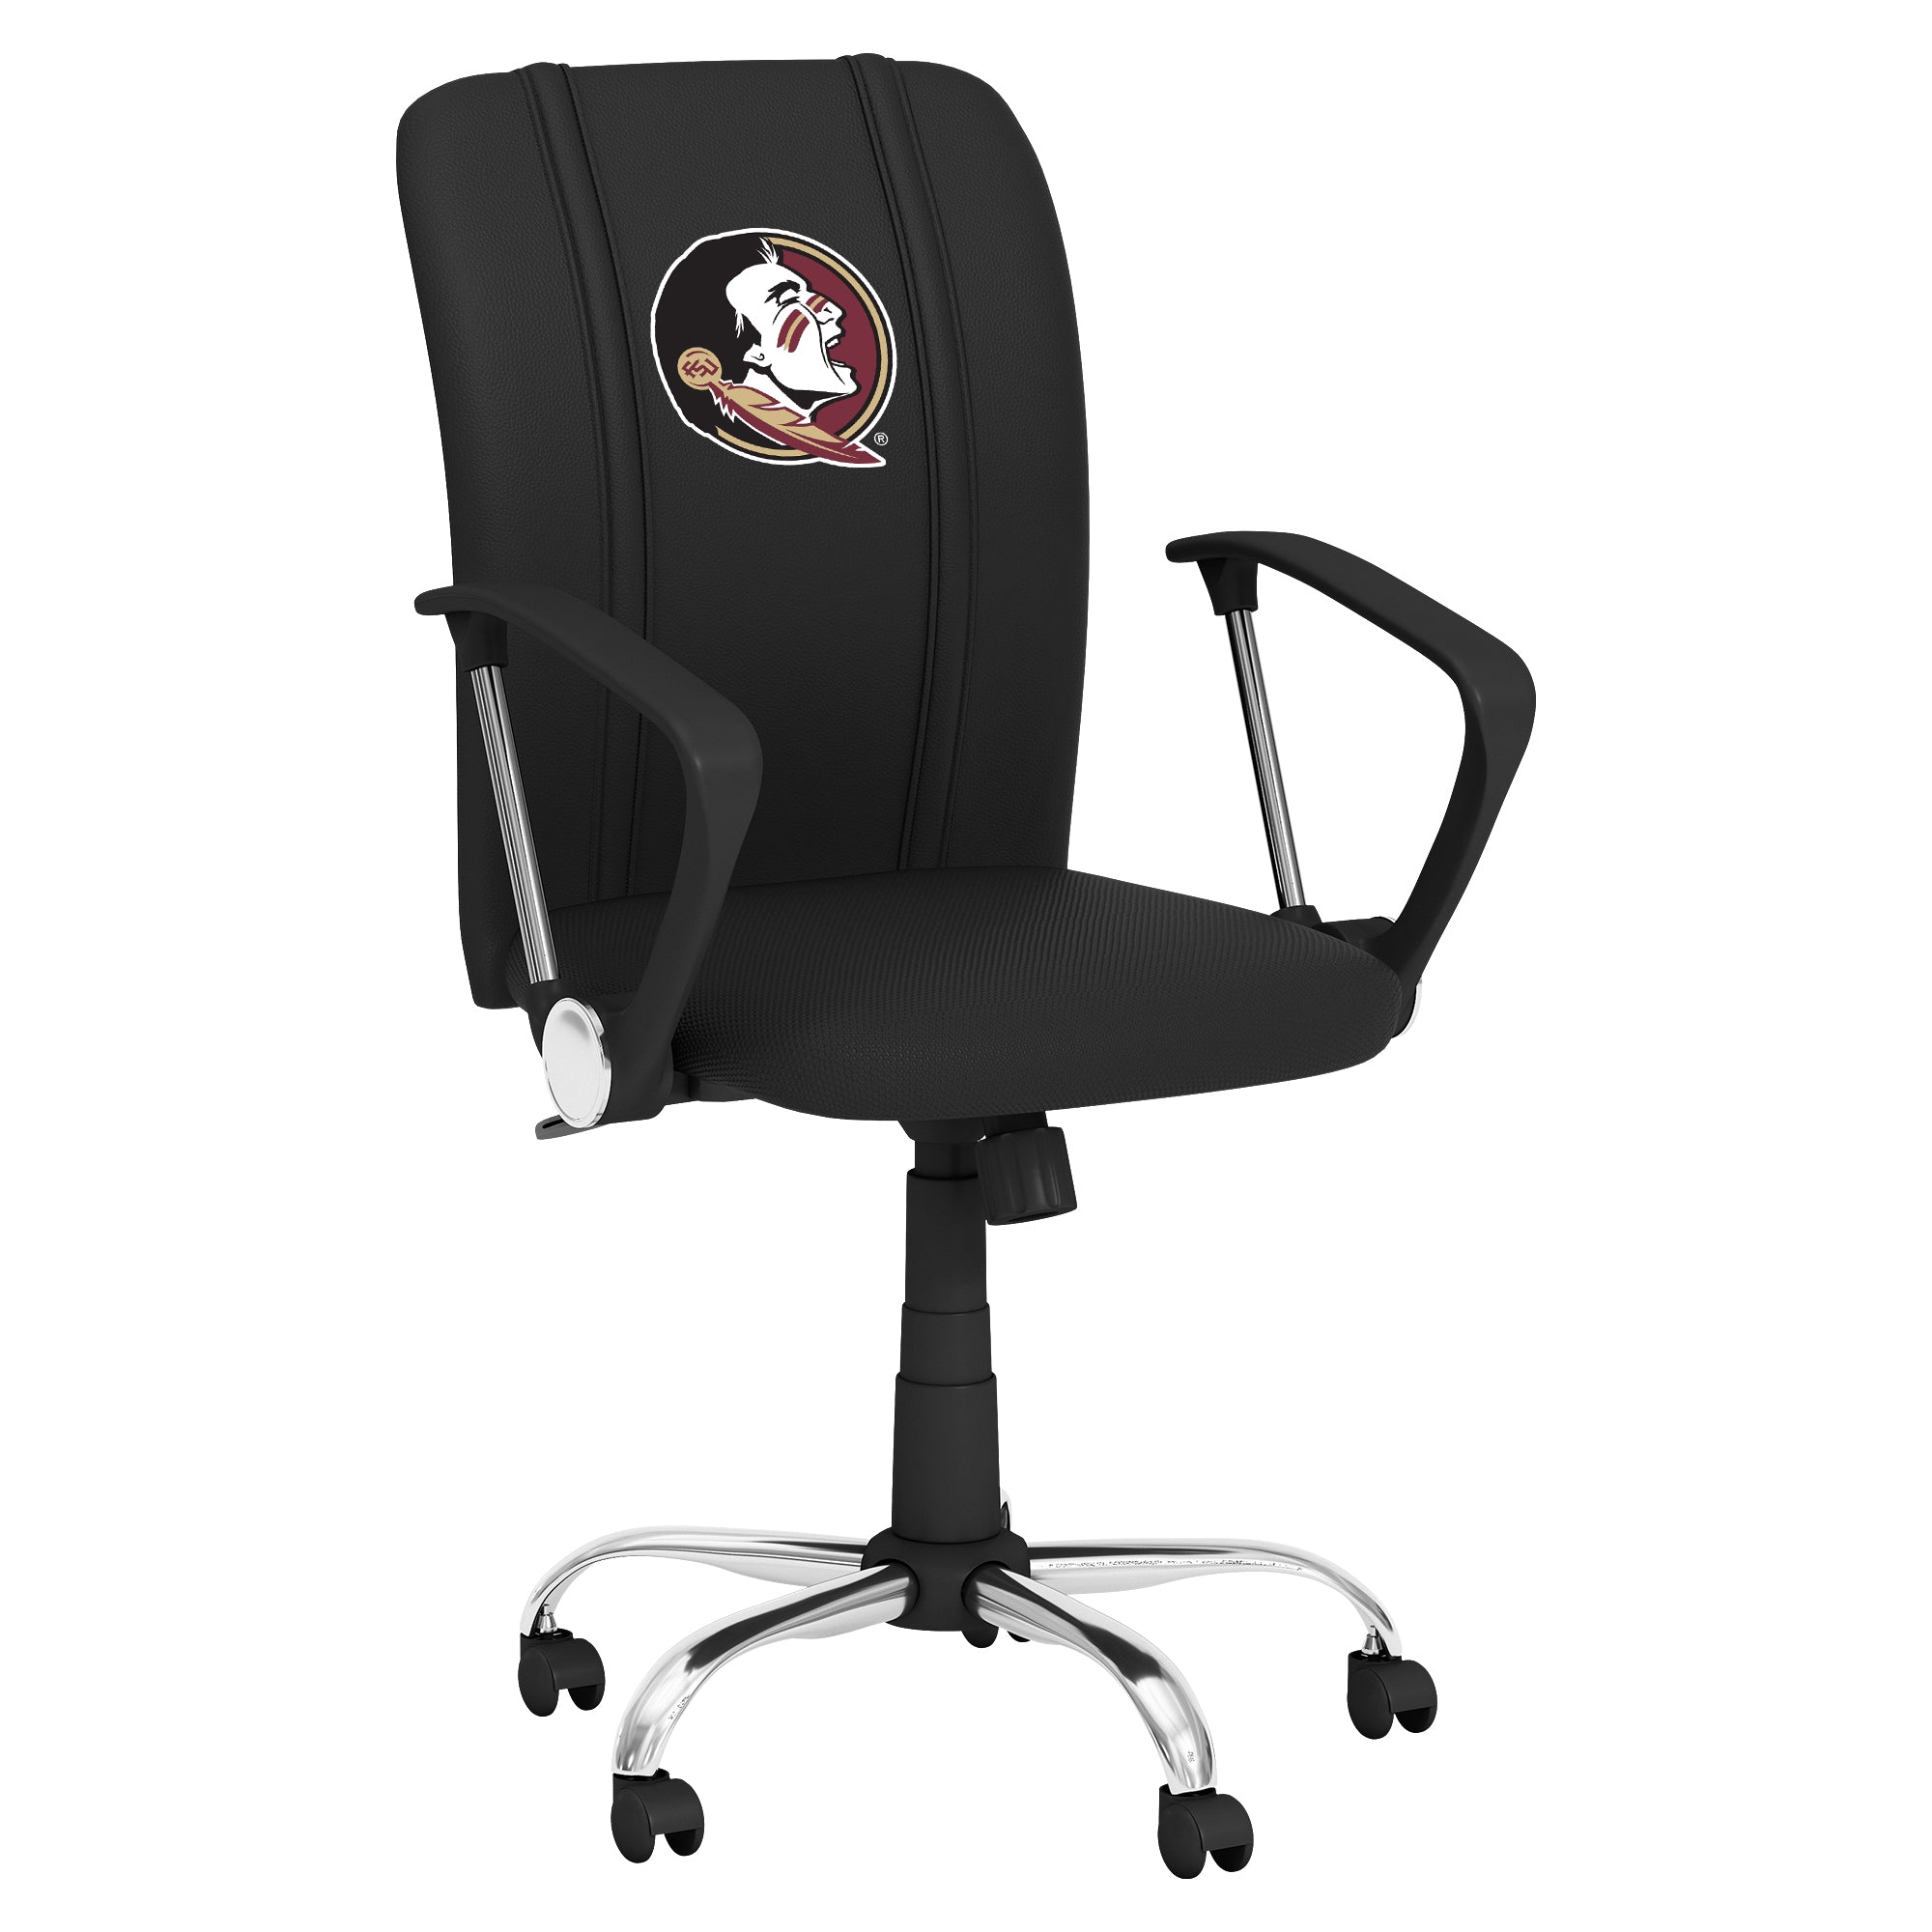 Florida State Seminoles Curve Task Chair with Florida State Seminoles Logo Panel